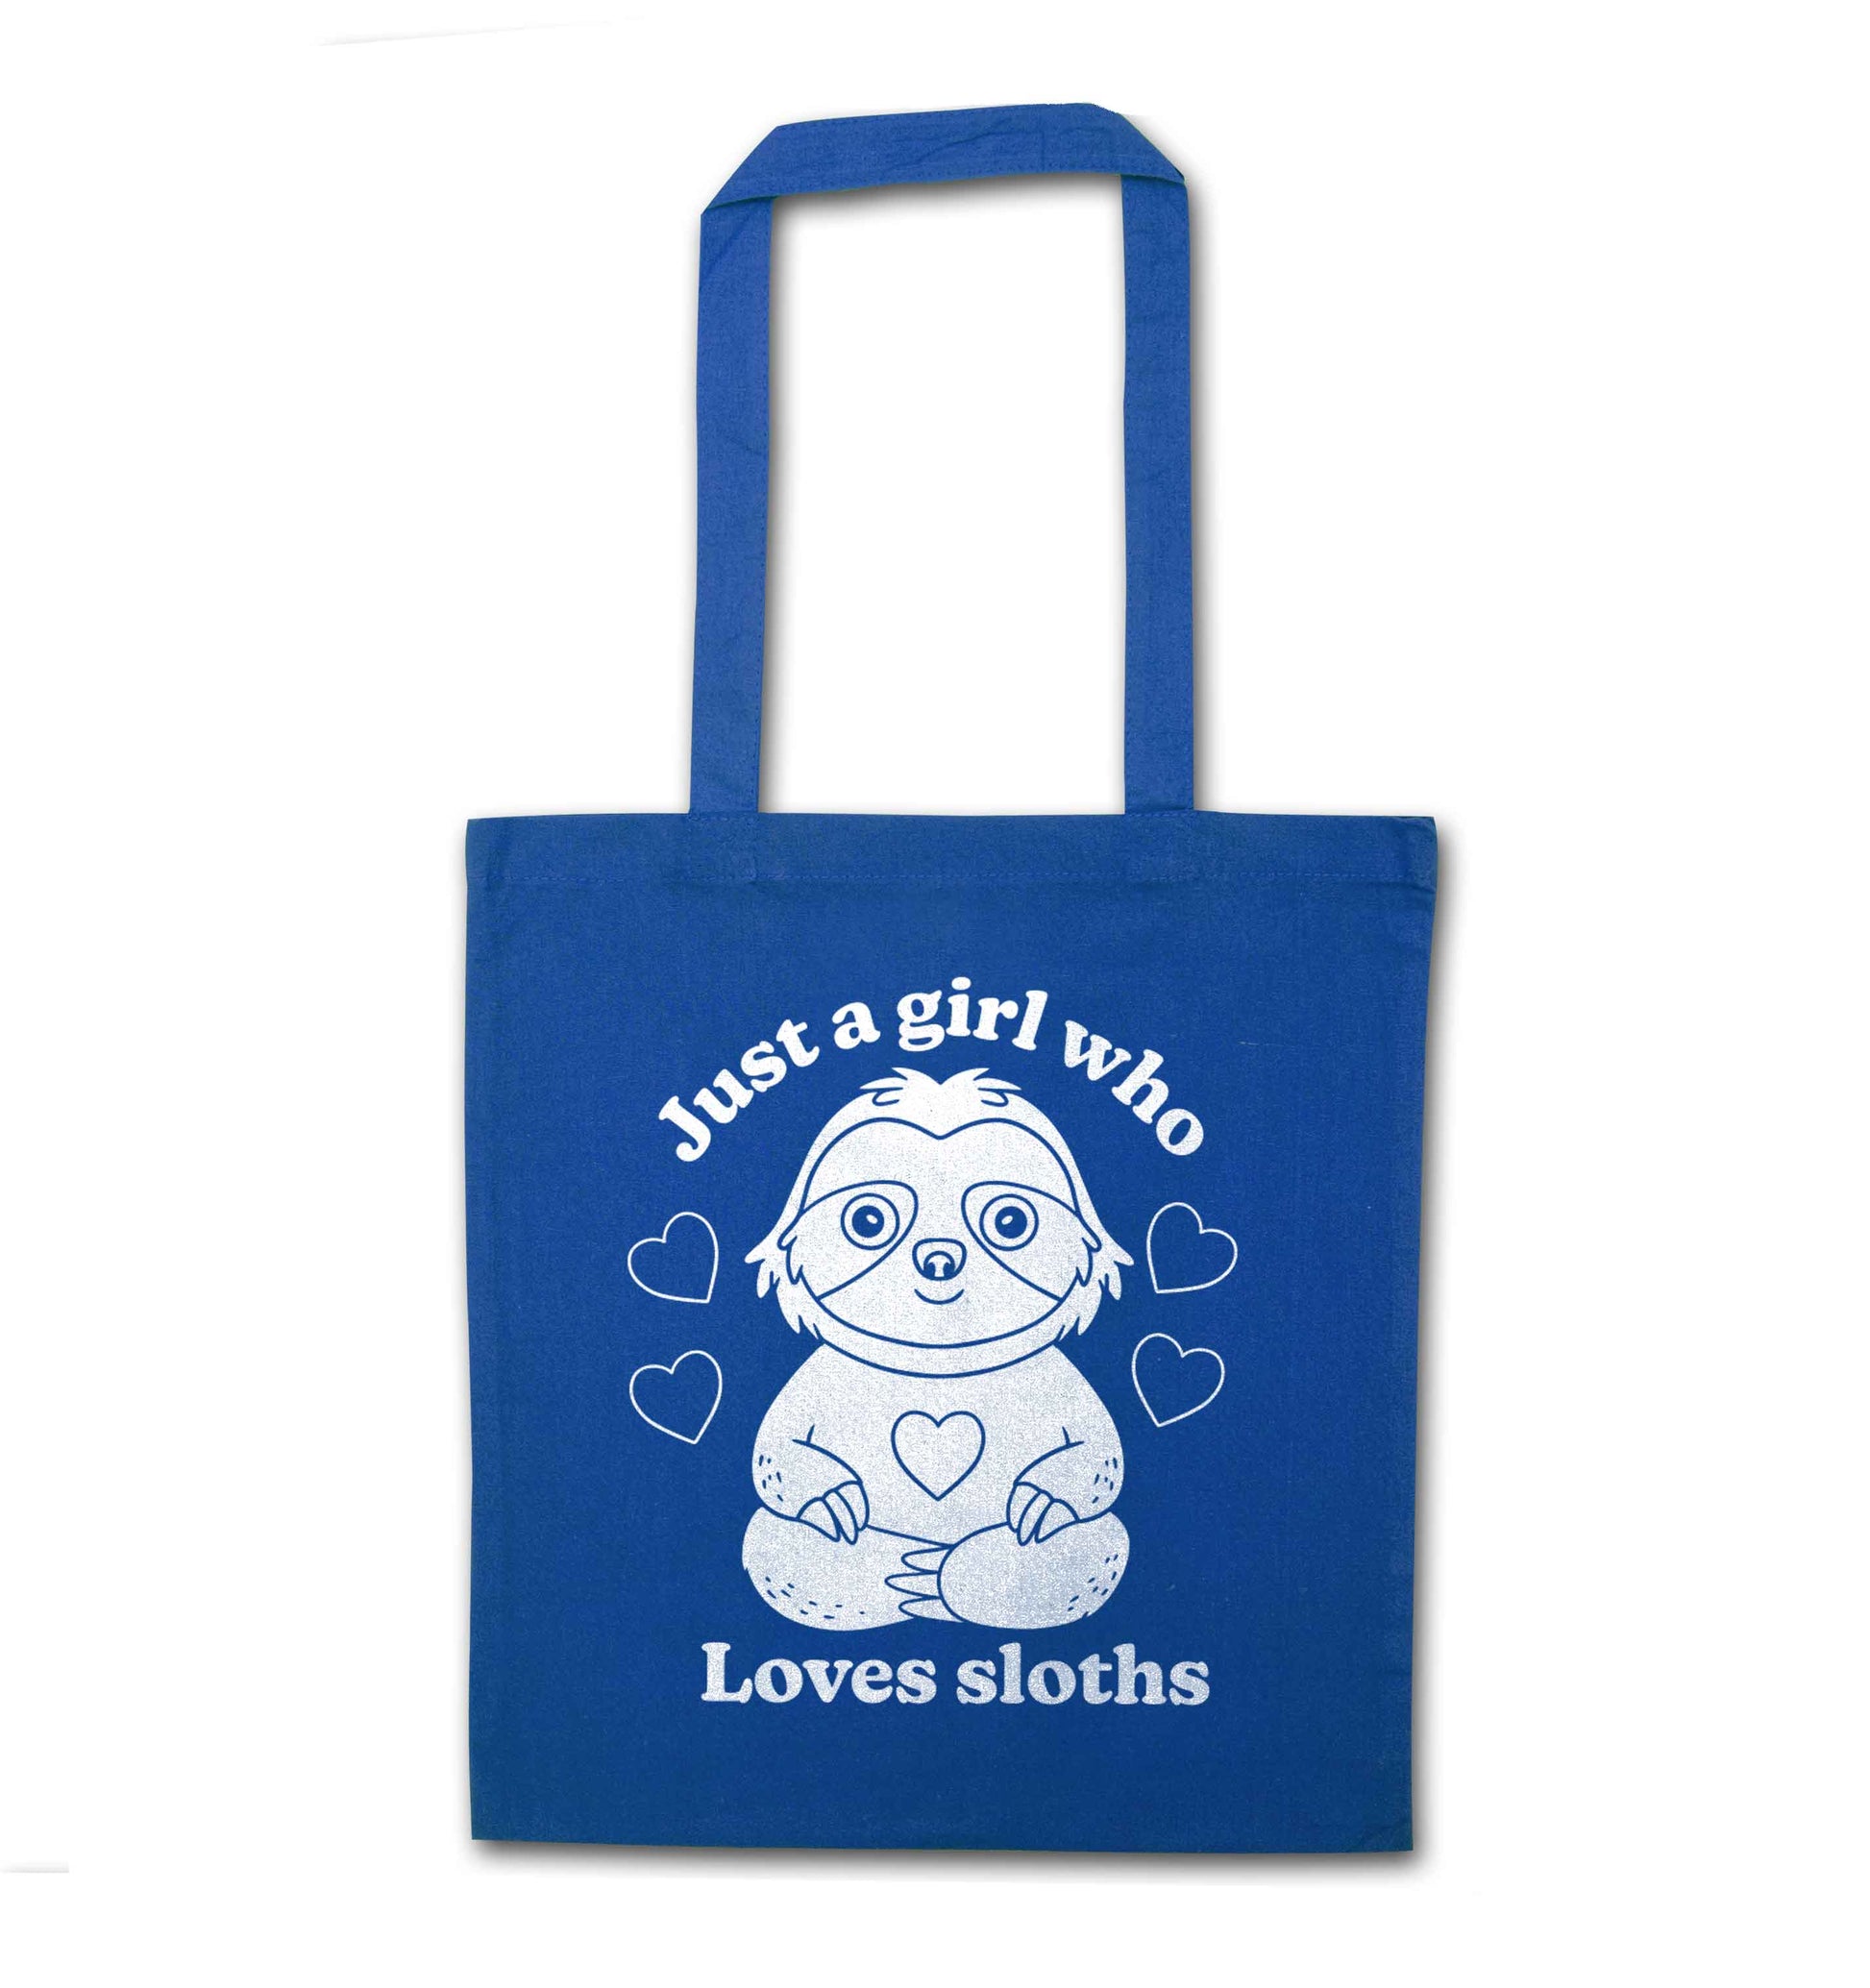 Just a girl who loves sloths blue tote bag